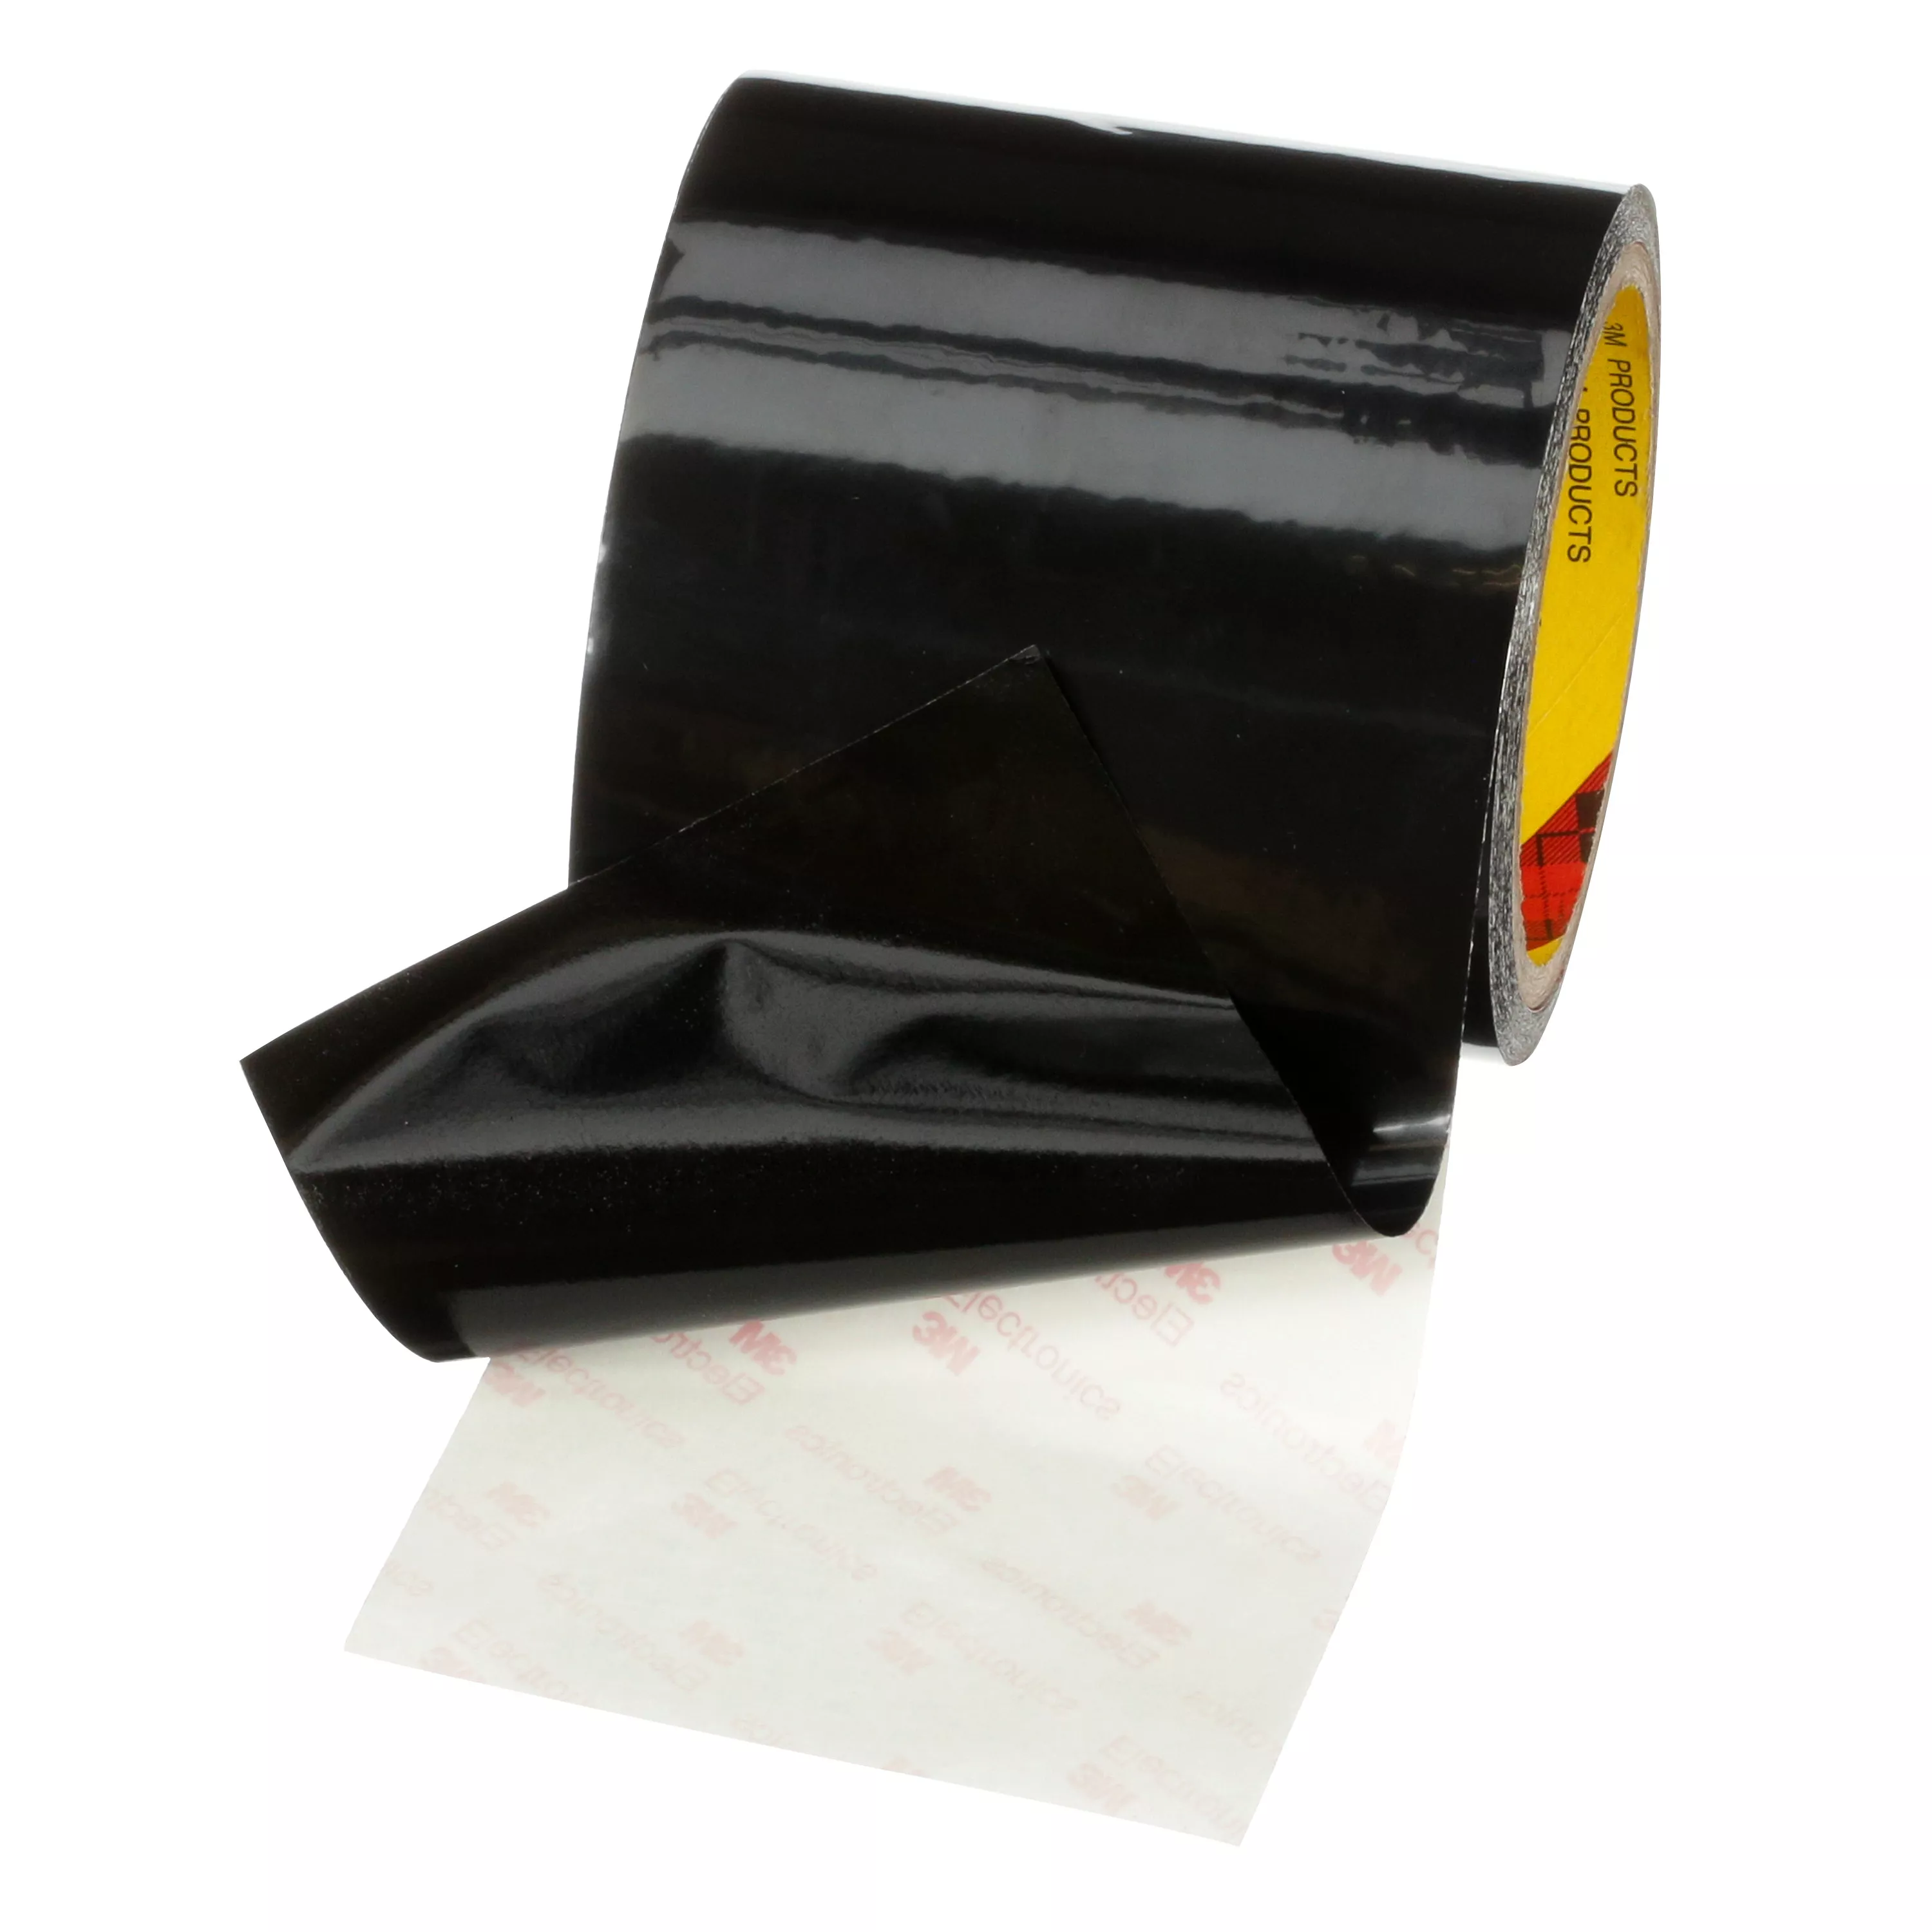 SKU 7100233227 | 3M™ Electrically Conductive Double-Sided Tape 9766B-100